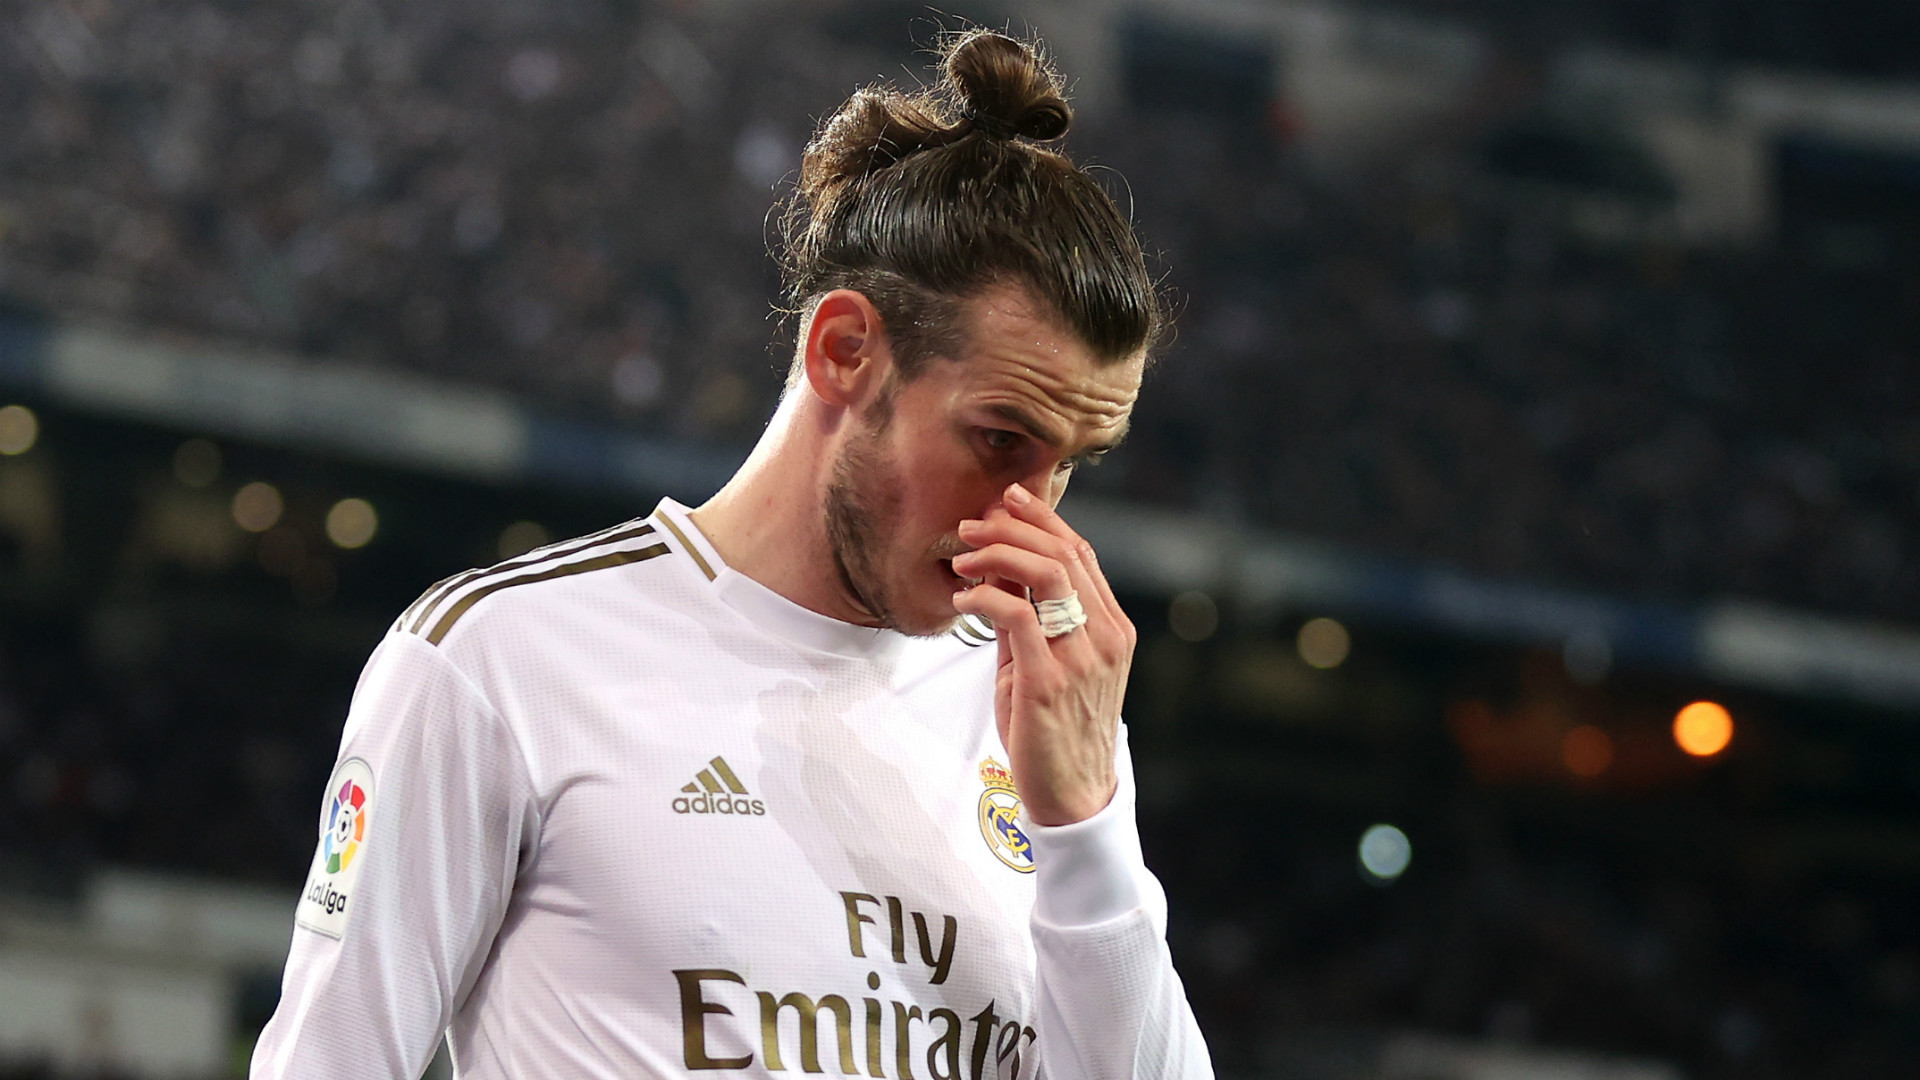 Bale’s agent slams ‘joke’ exit talk as Real Madrid boss Zidane has ‘never said anything bad’ about Welshman